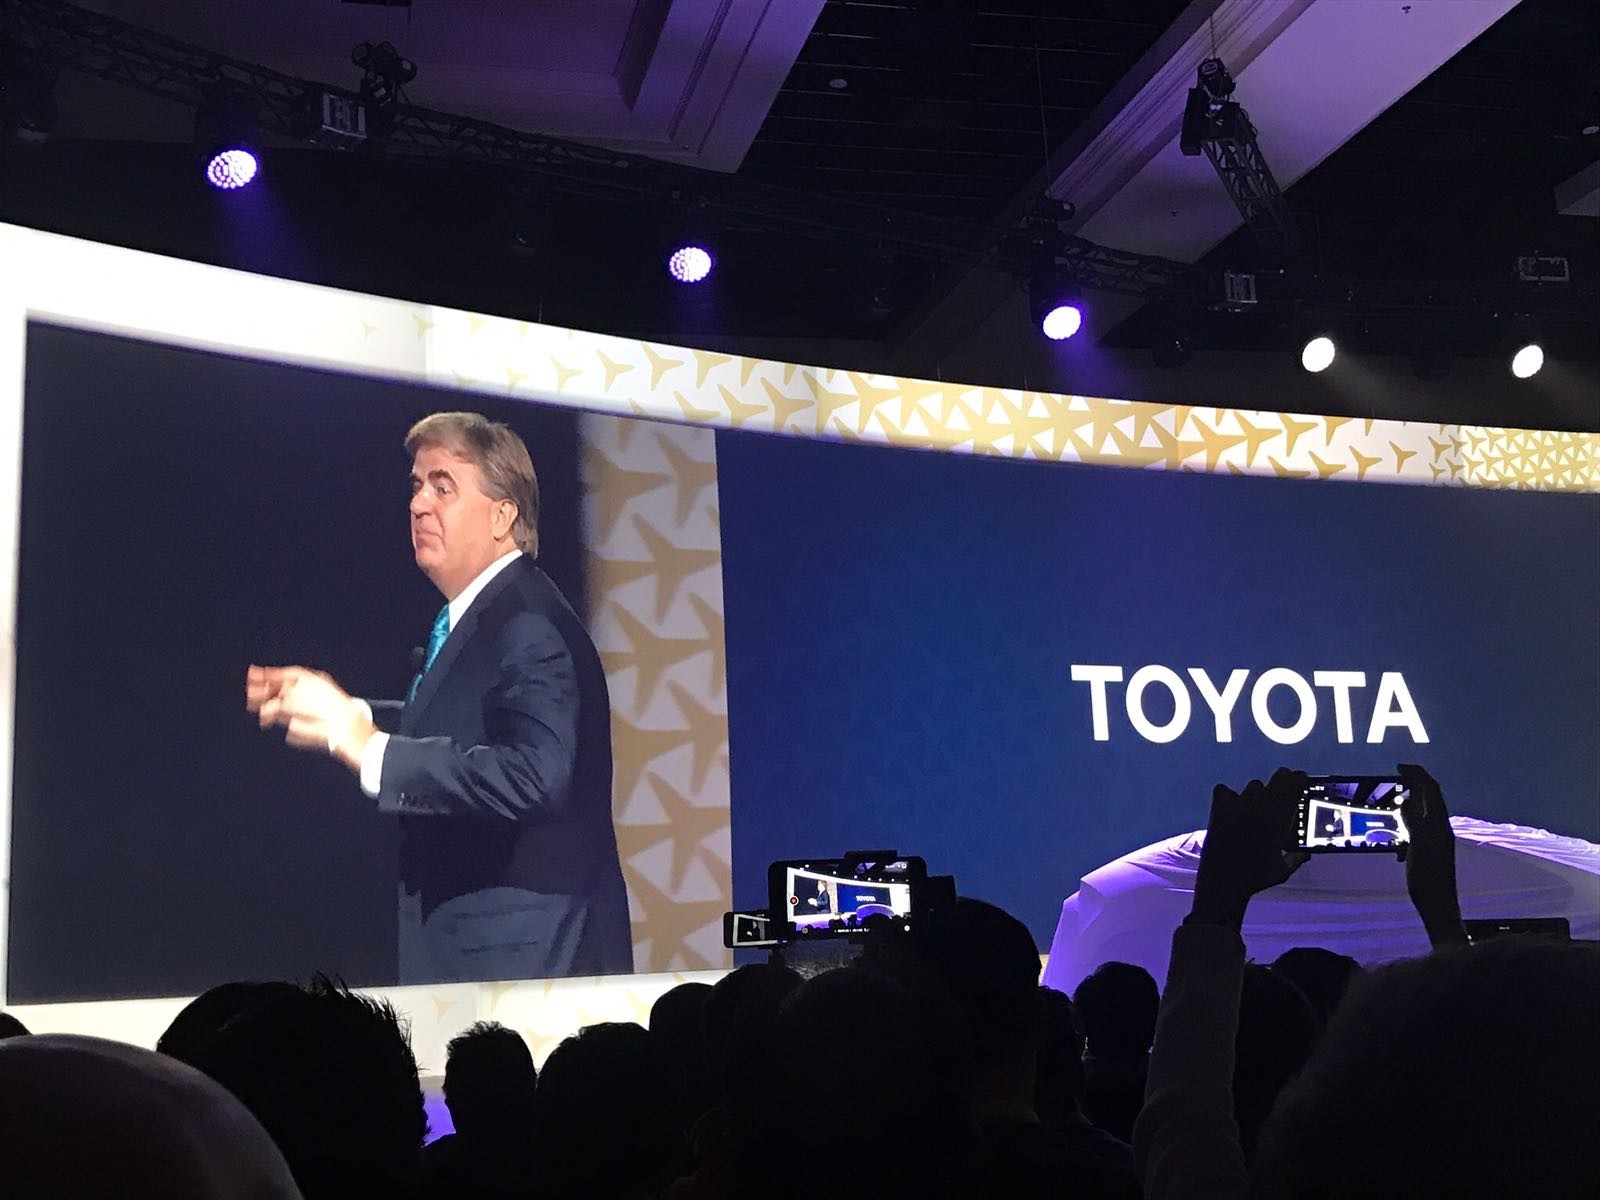 Robert Carter, Senior Vice President – Automotive Operations at Toyota Motor Sales, U.S.A. Inc., presents during the reveal of the Toyota Concept-I, a fun twist on the driverless car concept. 